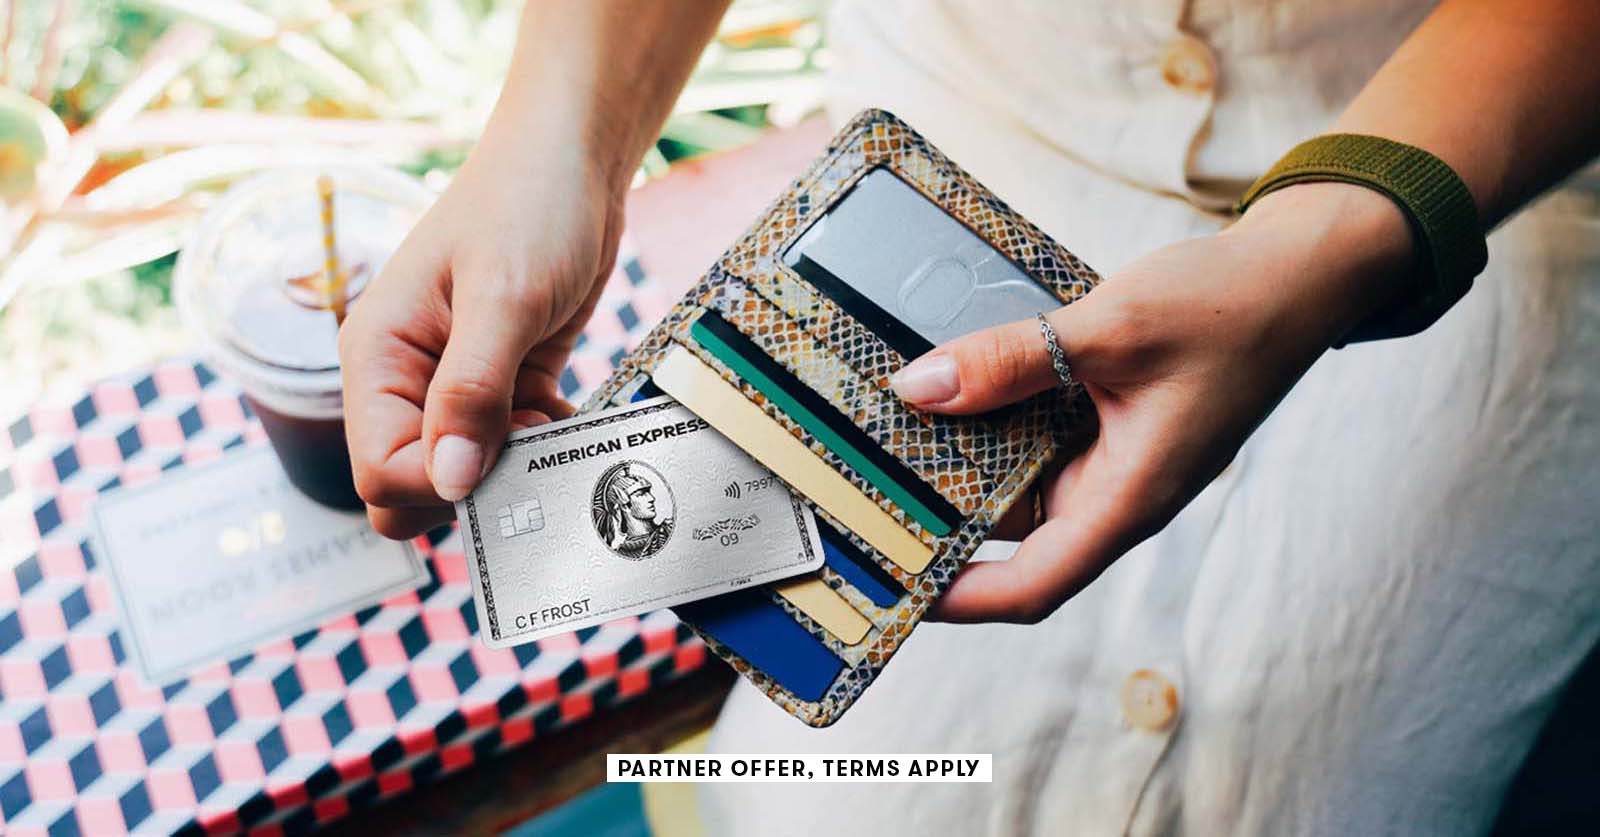 Amex Platinum Equinox credit switching to annual: Easier to use